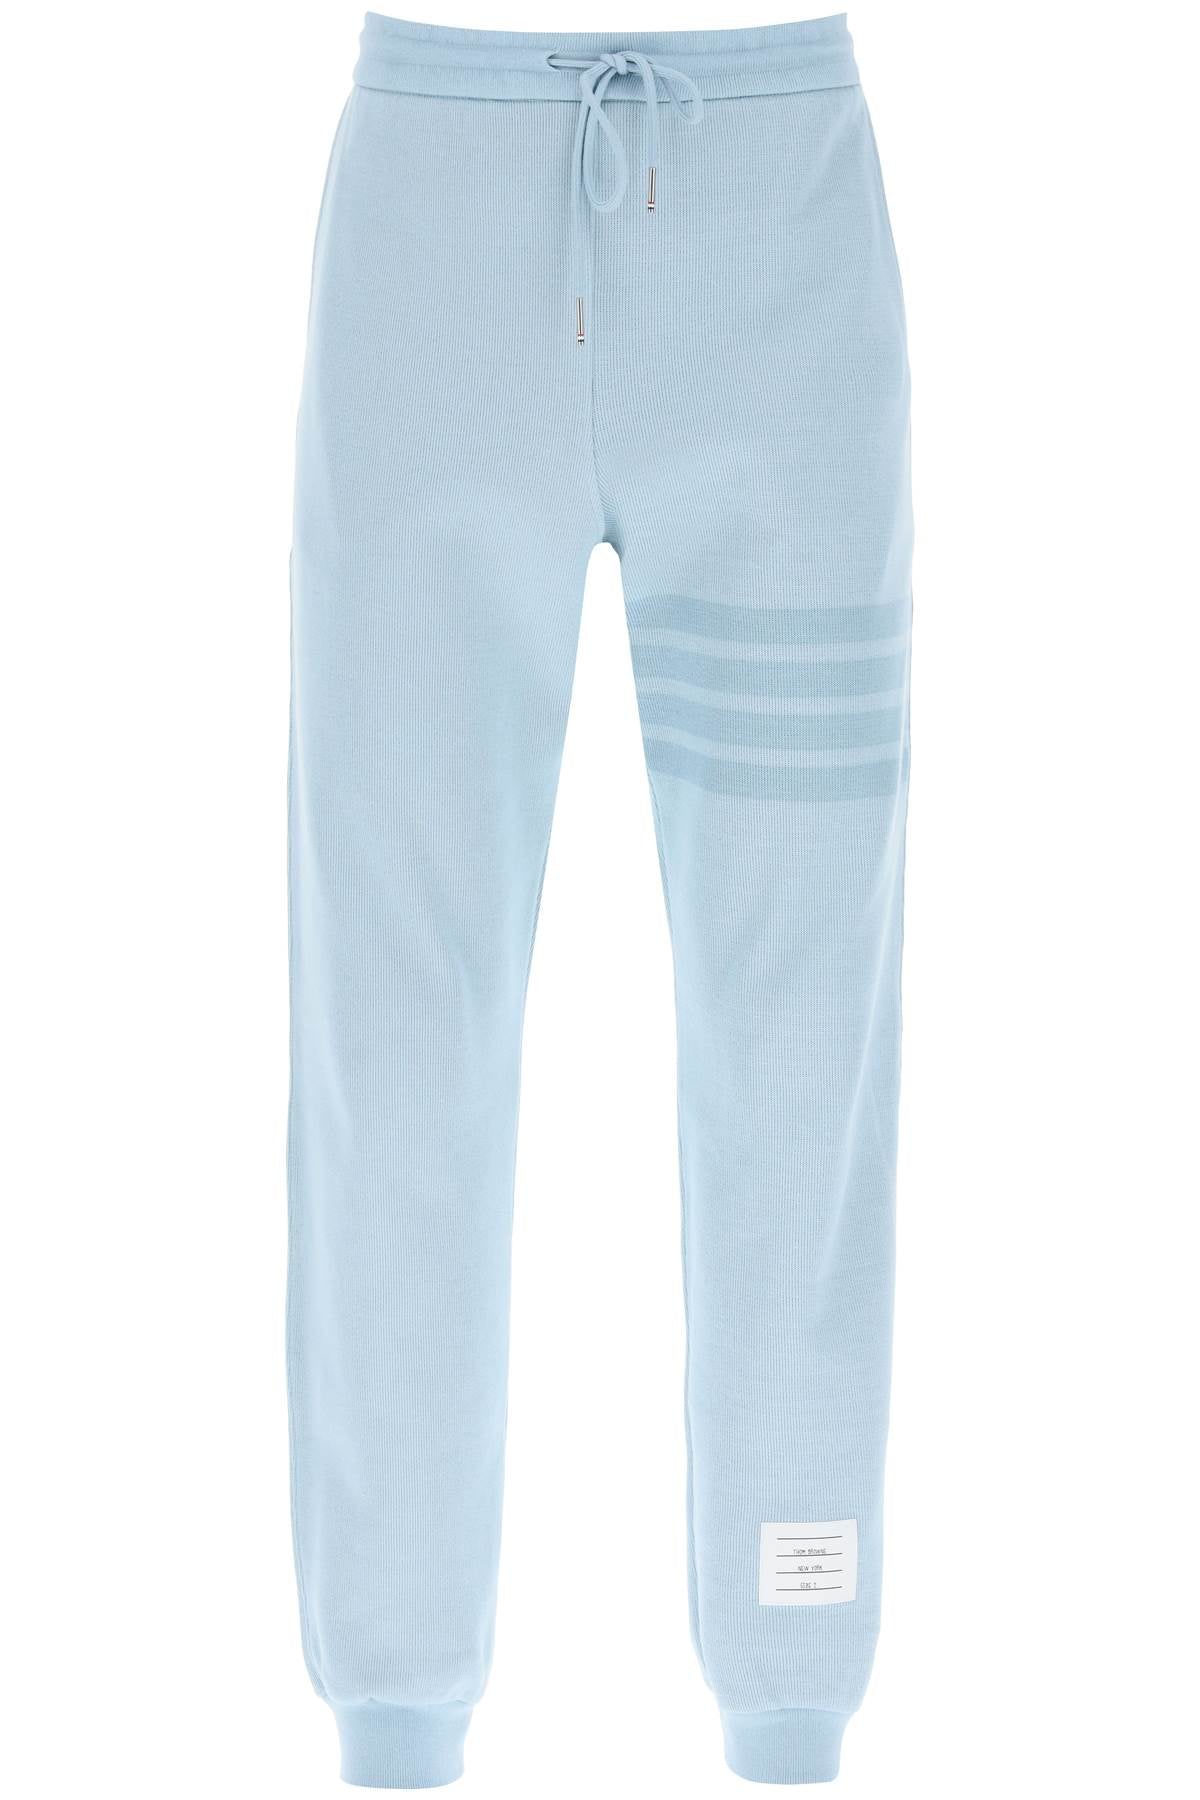 Thom browne 4-bar joggers in cotton knit-0